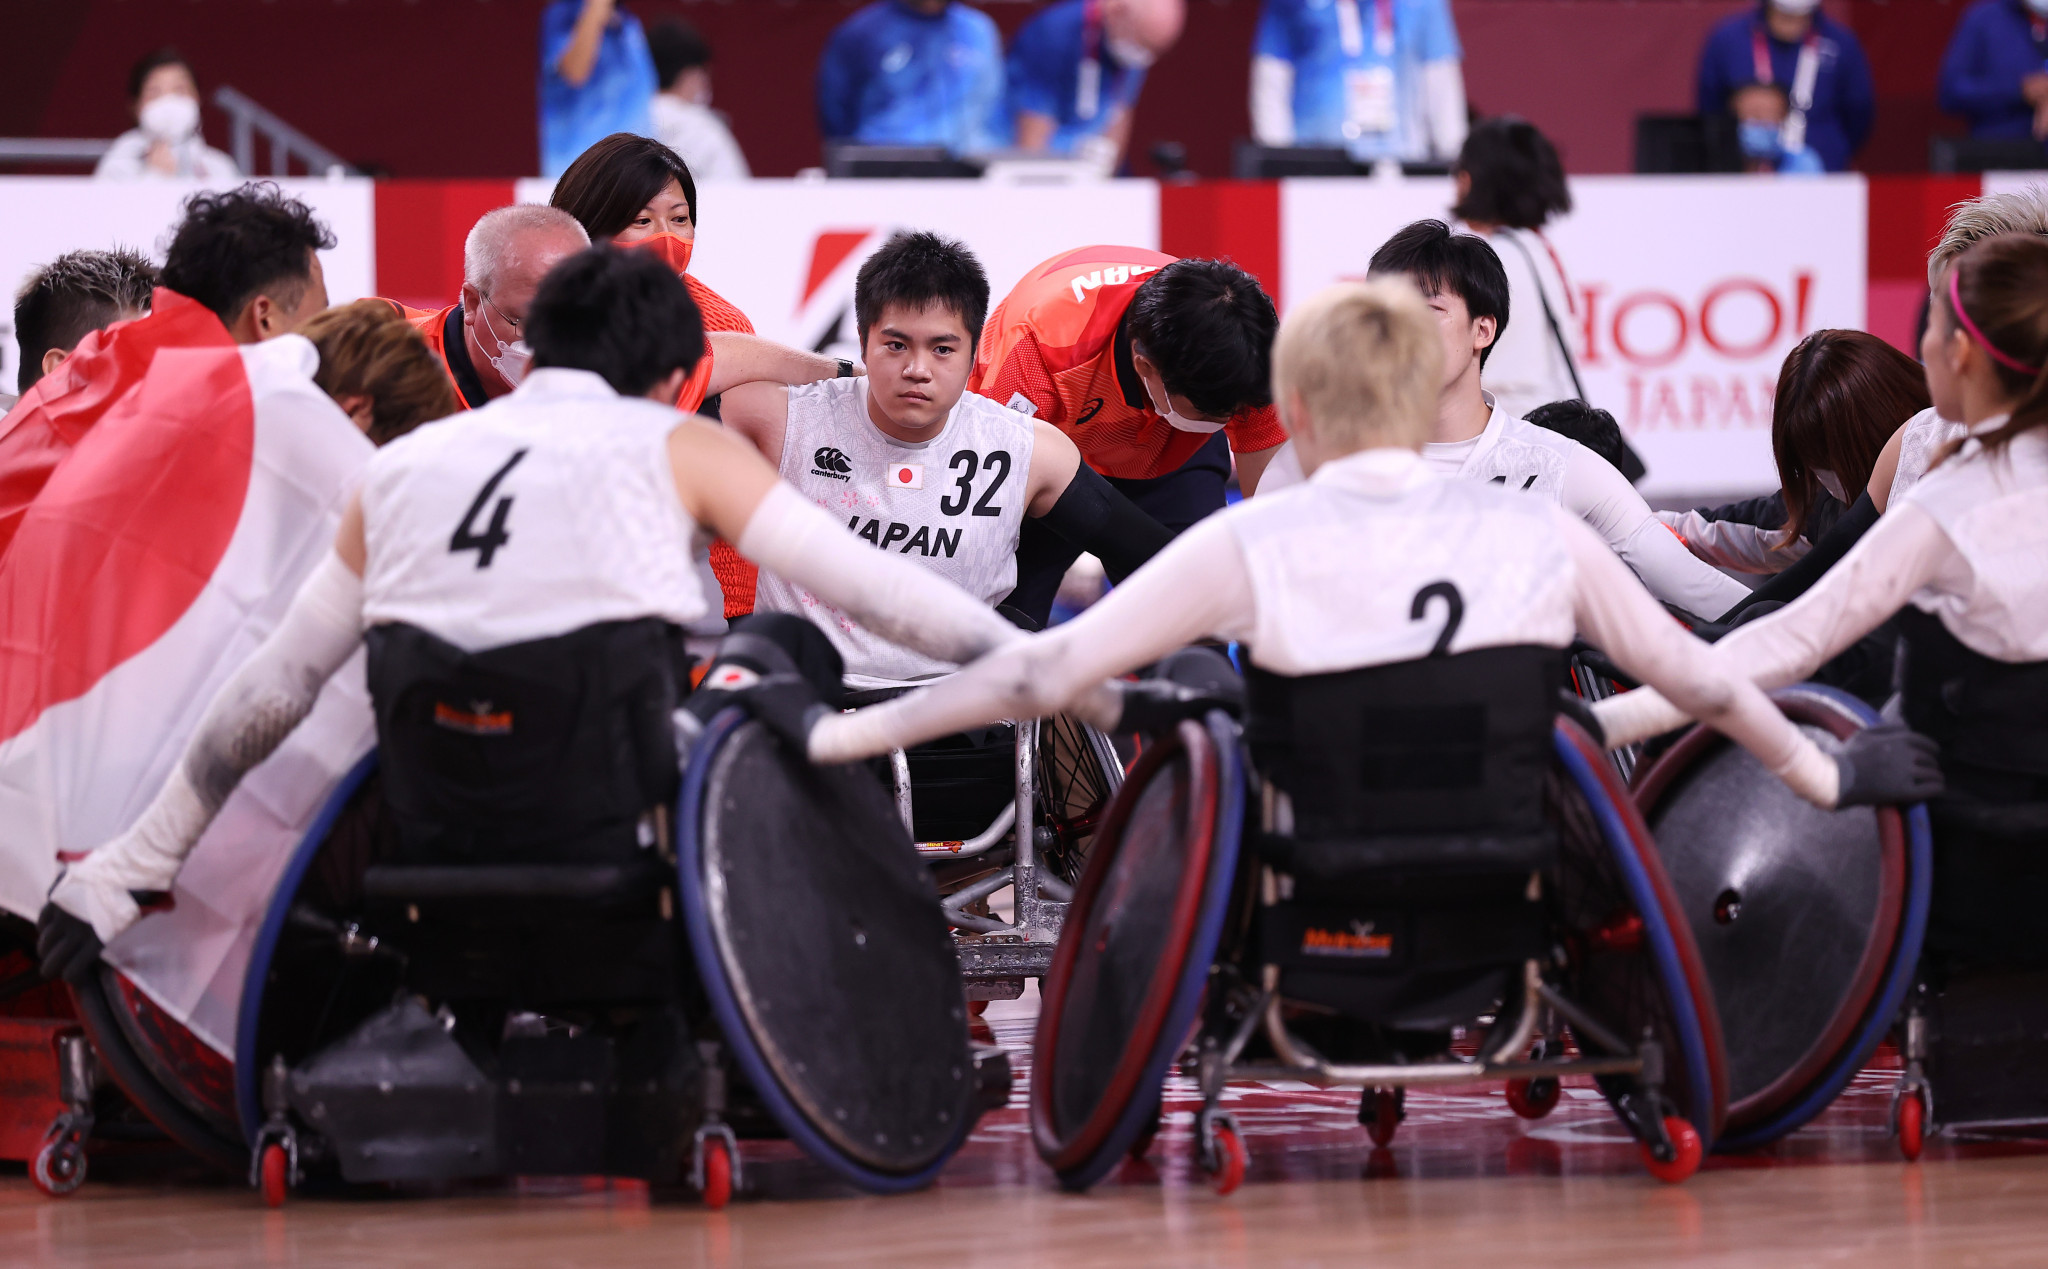 Australia, France and Japan dominate at World Wheelchair Rugby Championship